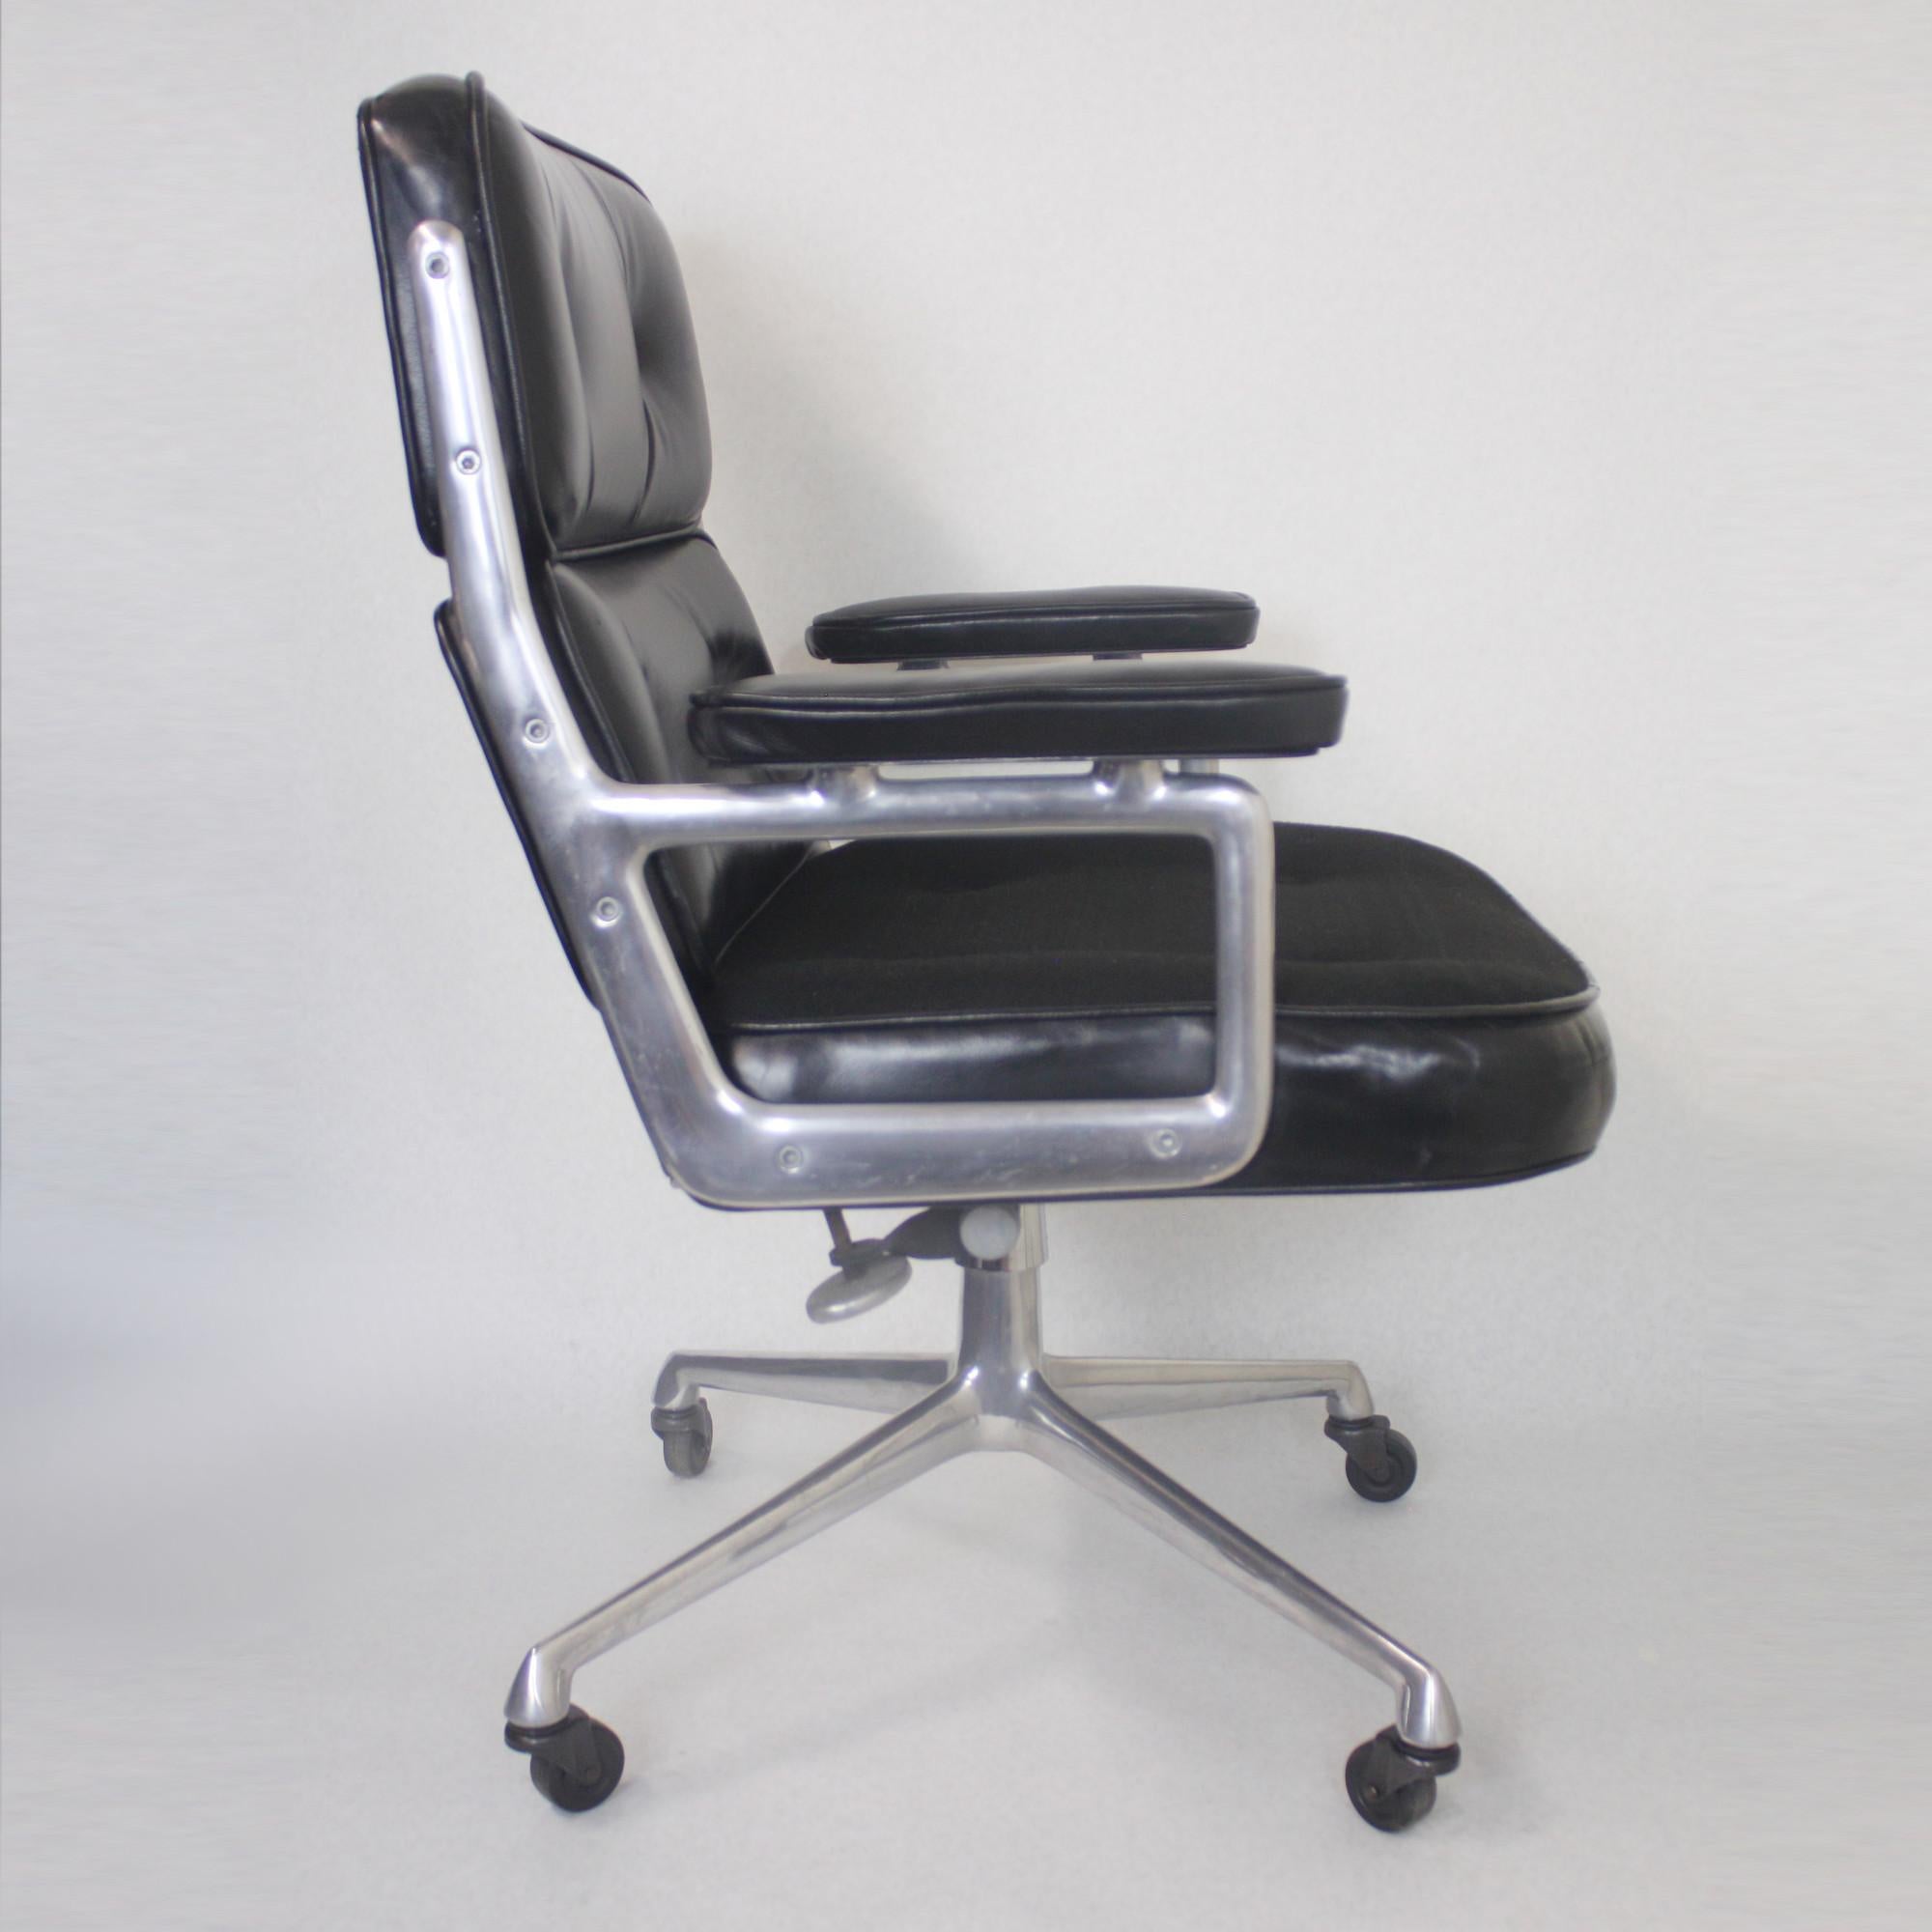 Mid-20th Century 1960s Mid-Century Modern Herman Miller Time Life Executive Desk Lounge Chair